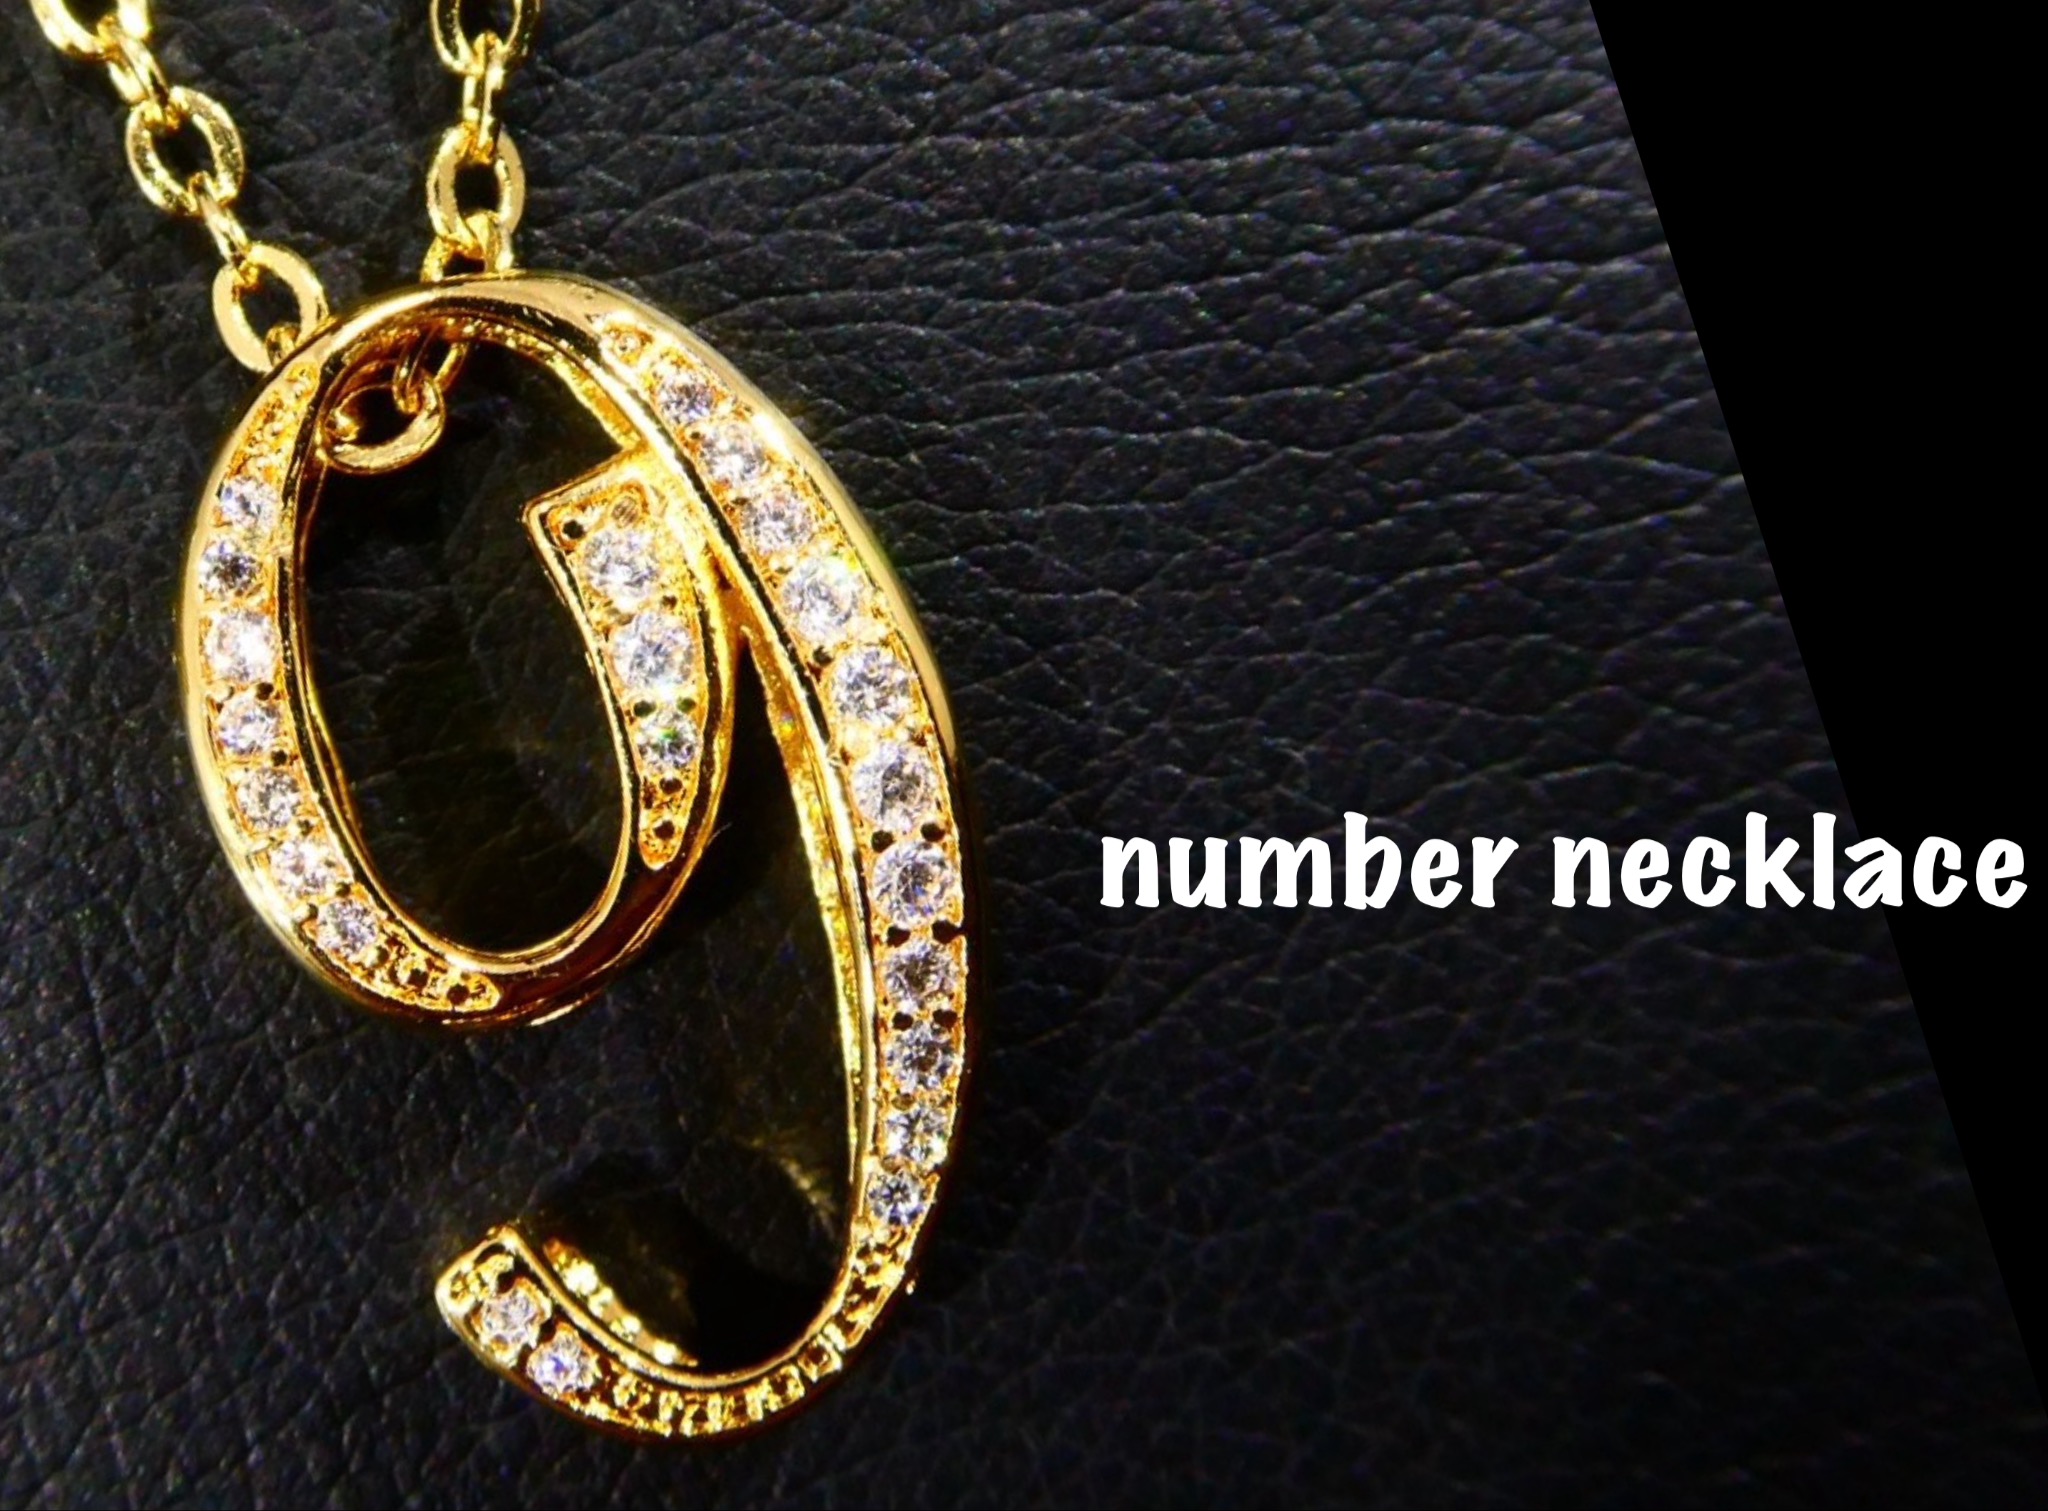 number necklace